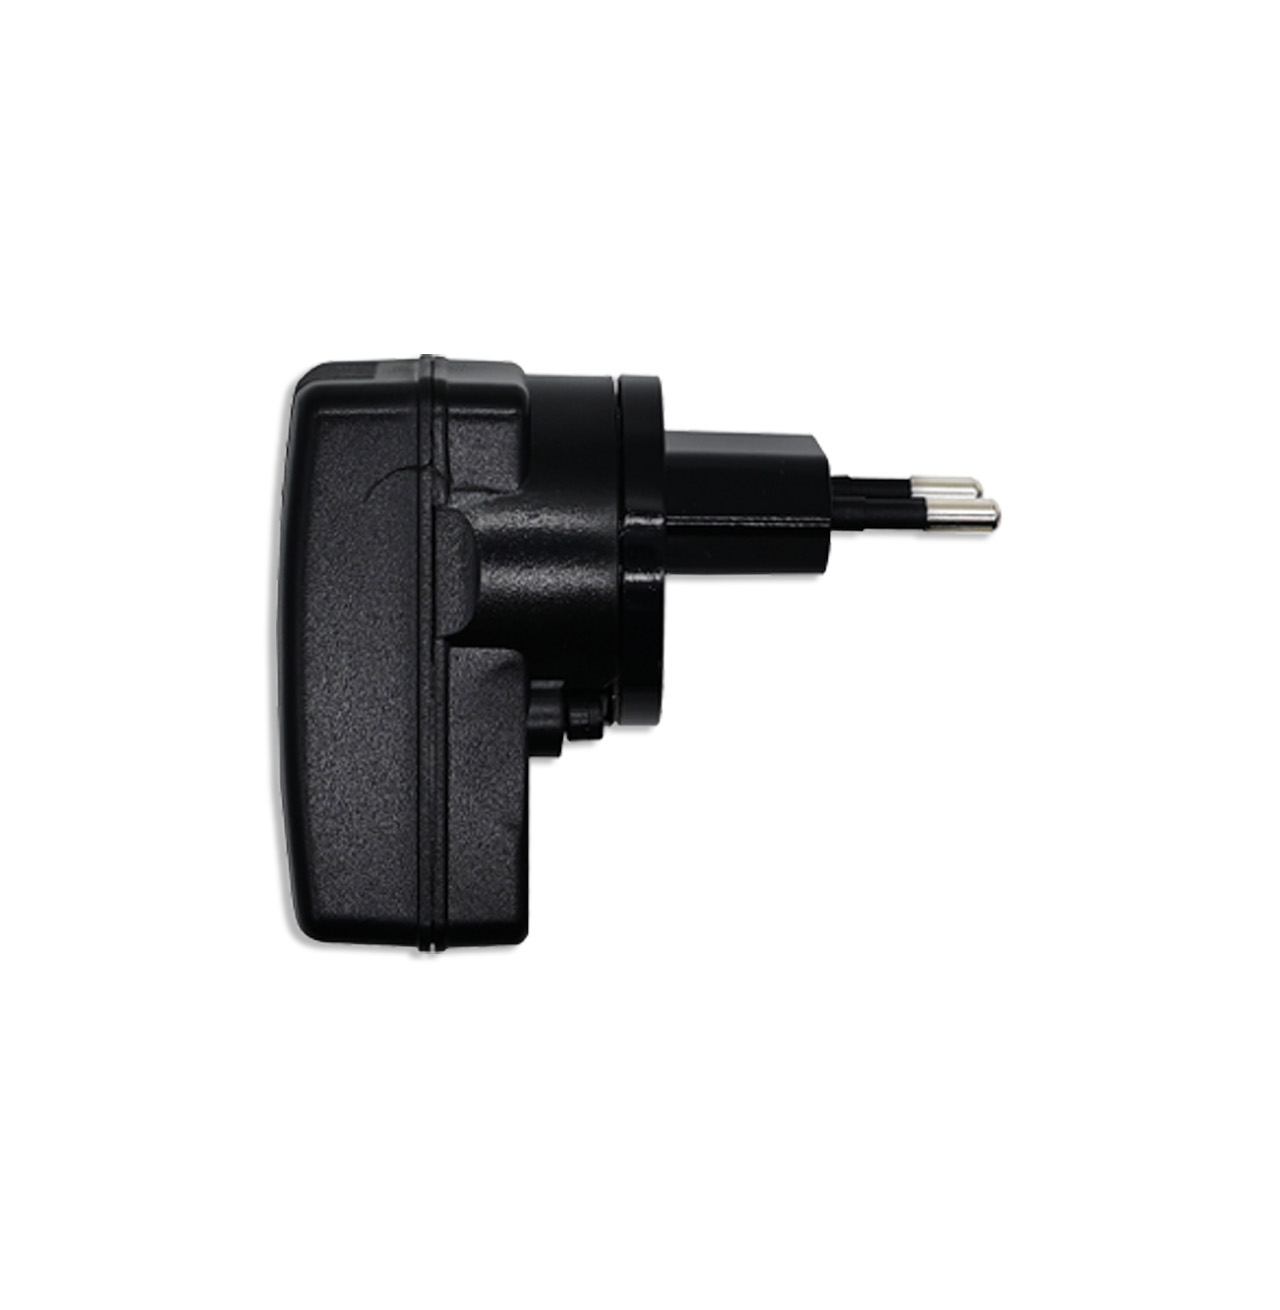 X-431 PRO3 Power Adapter 5V2A, can be equipped with UK regulation, RoHS